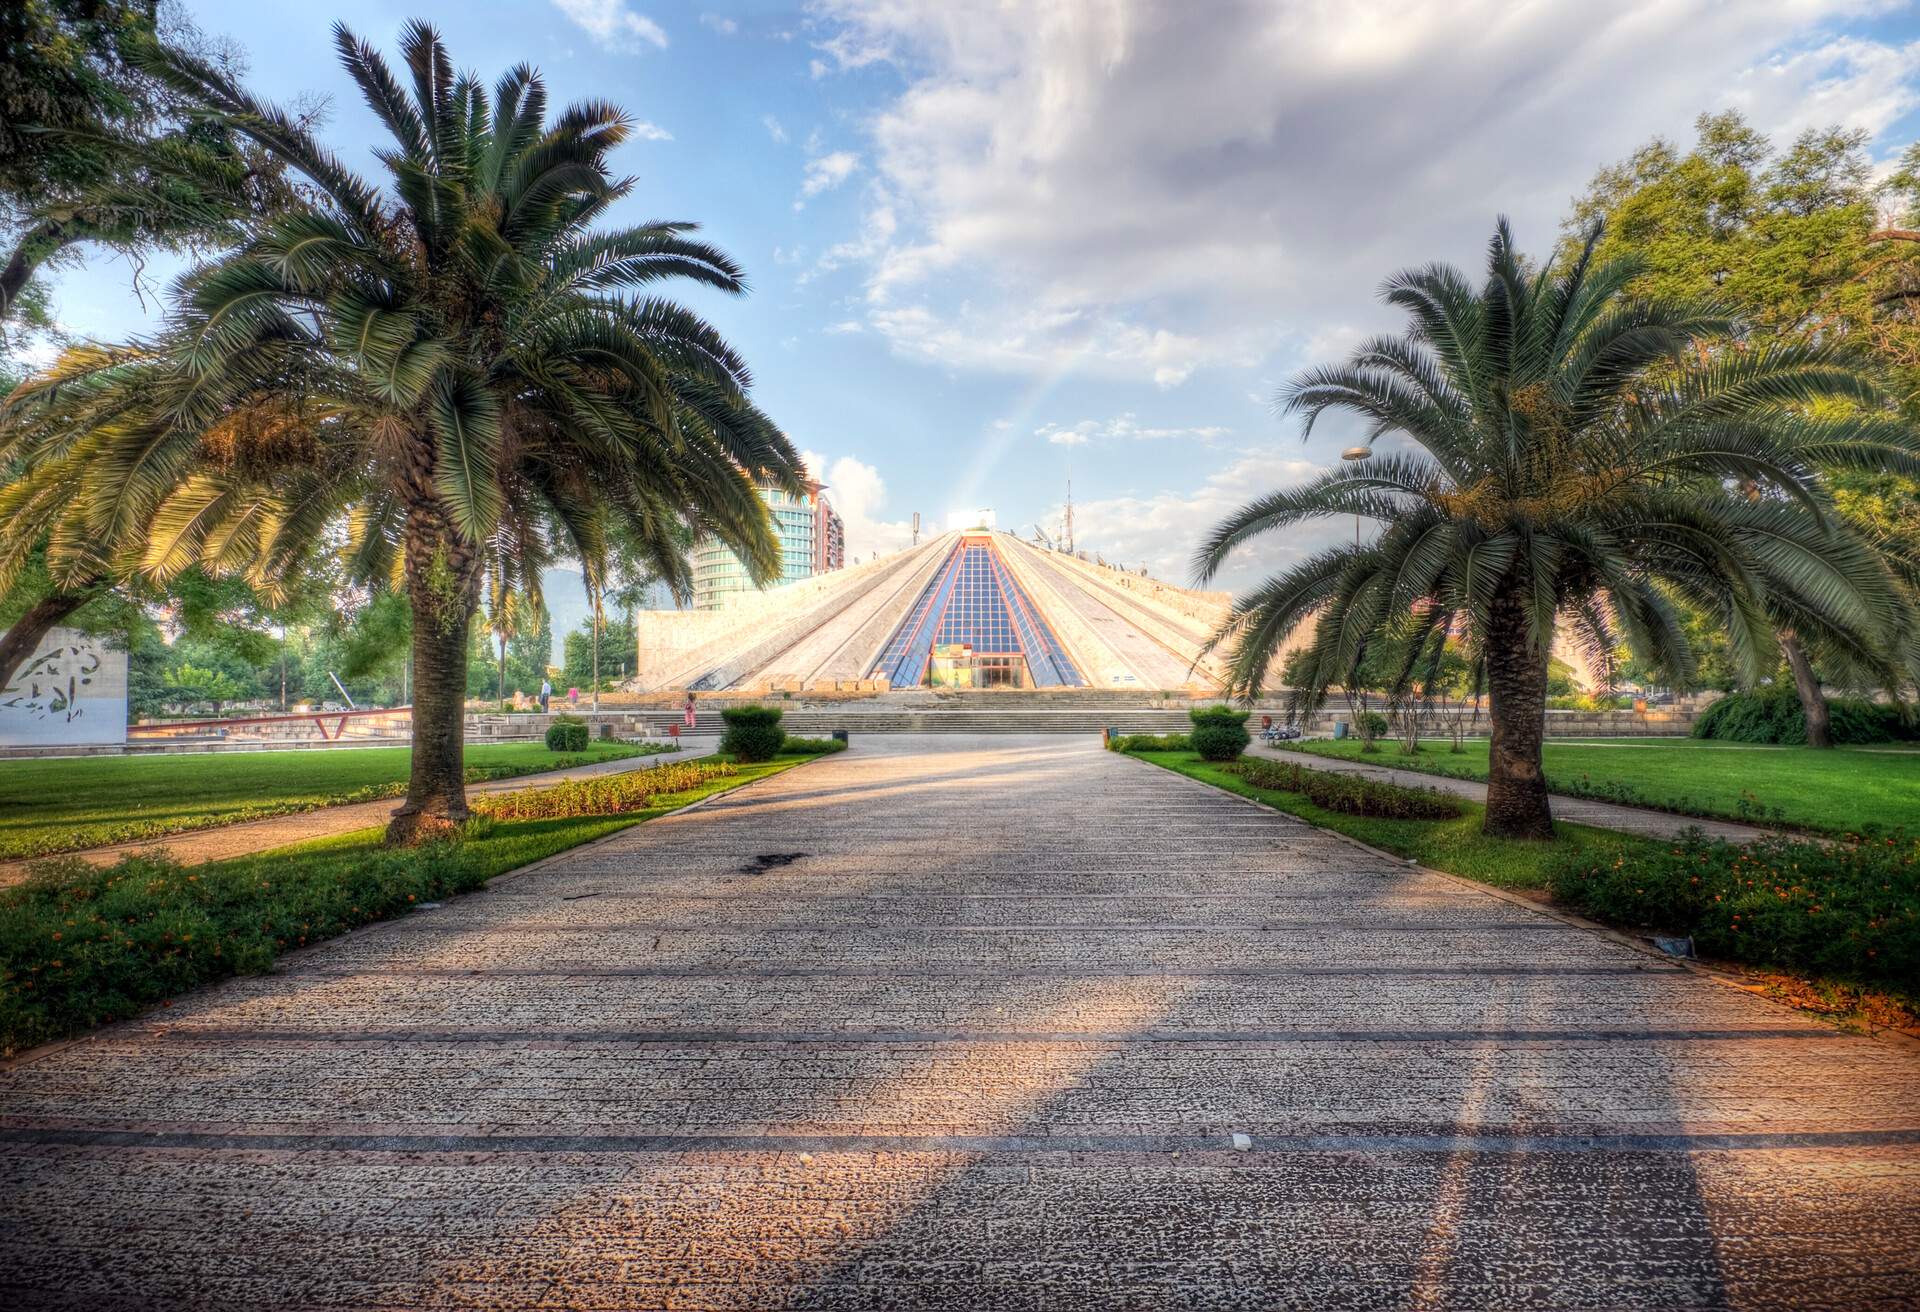 Tirana Albania: This national symbol was erected in 1985 by the daughter of the former communist dictator Enver Hoxha, with intentions of building a museum honoring the life of her father. Today the building awaits renovation and a new function. A rainbow can be seen emerging from right behind the pyramid after a brief rain storm. Photo processed for high dynamic range.